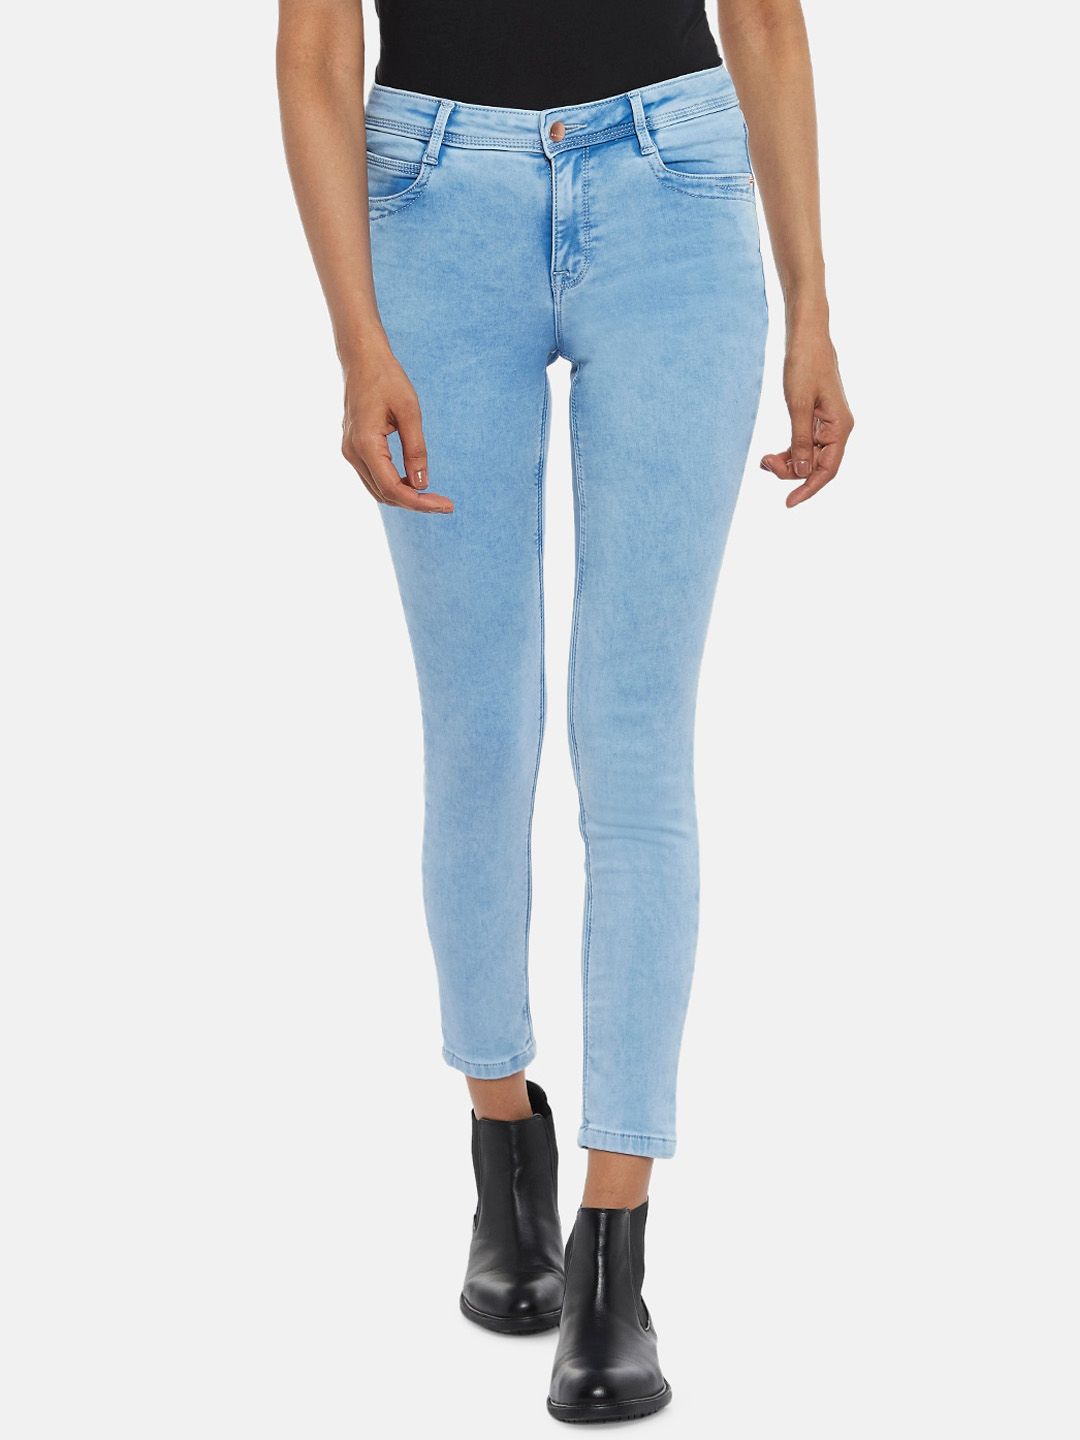 SF JEANS by Pantaloons Women Blue Skinny Fit Jeans Price in India